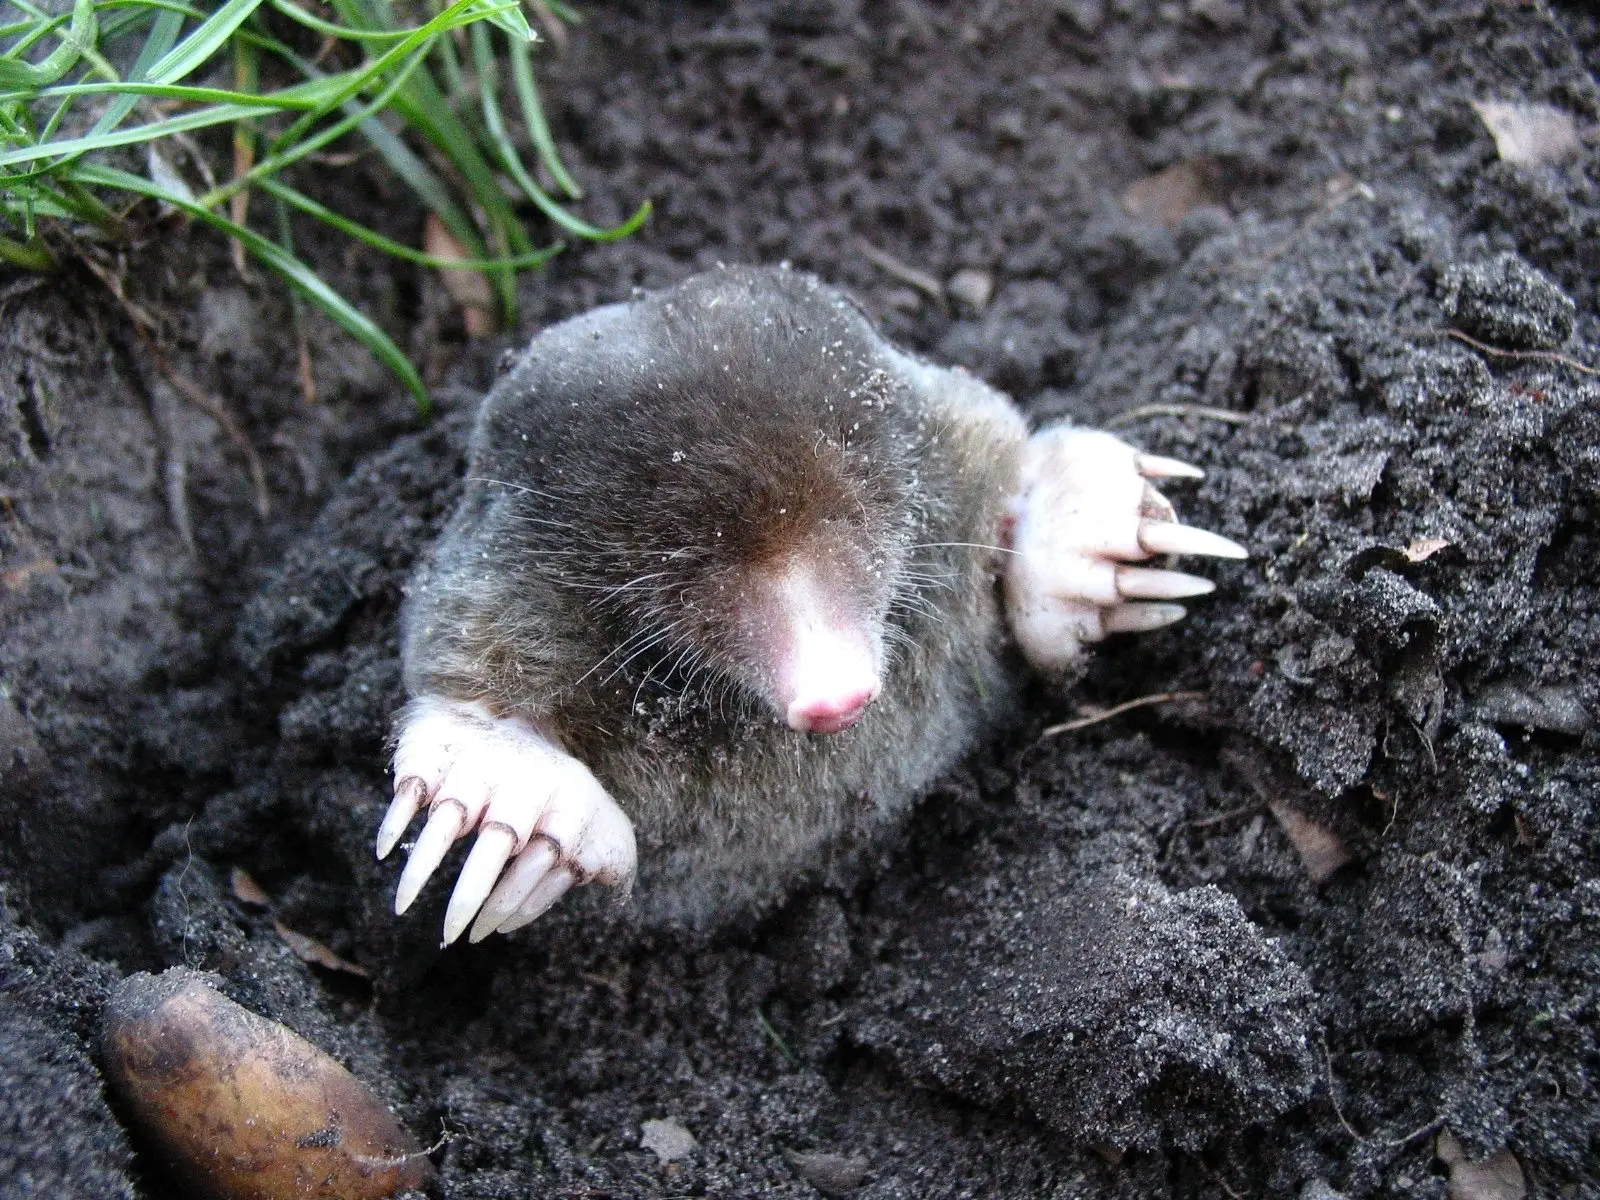 How To Catch A Mole In The House?